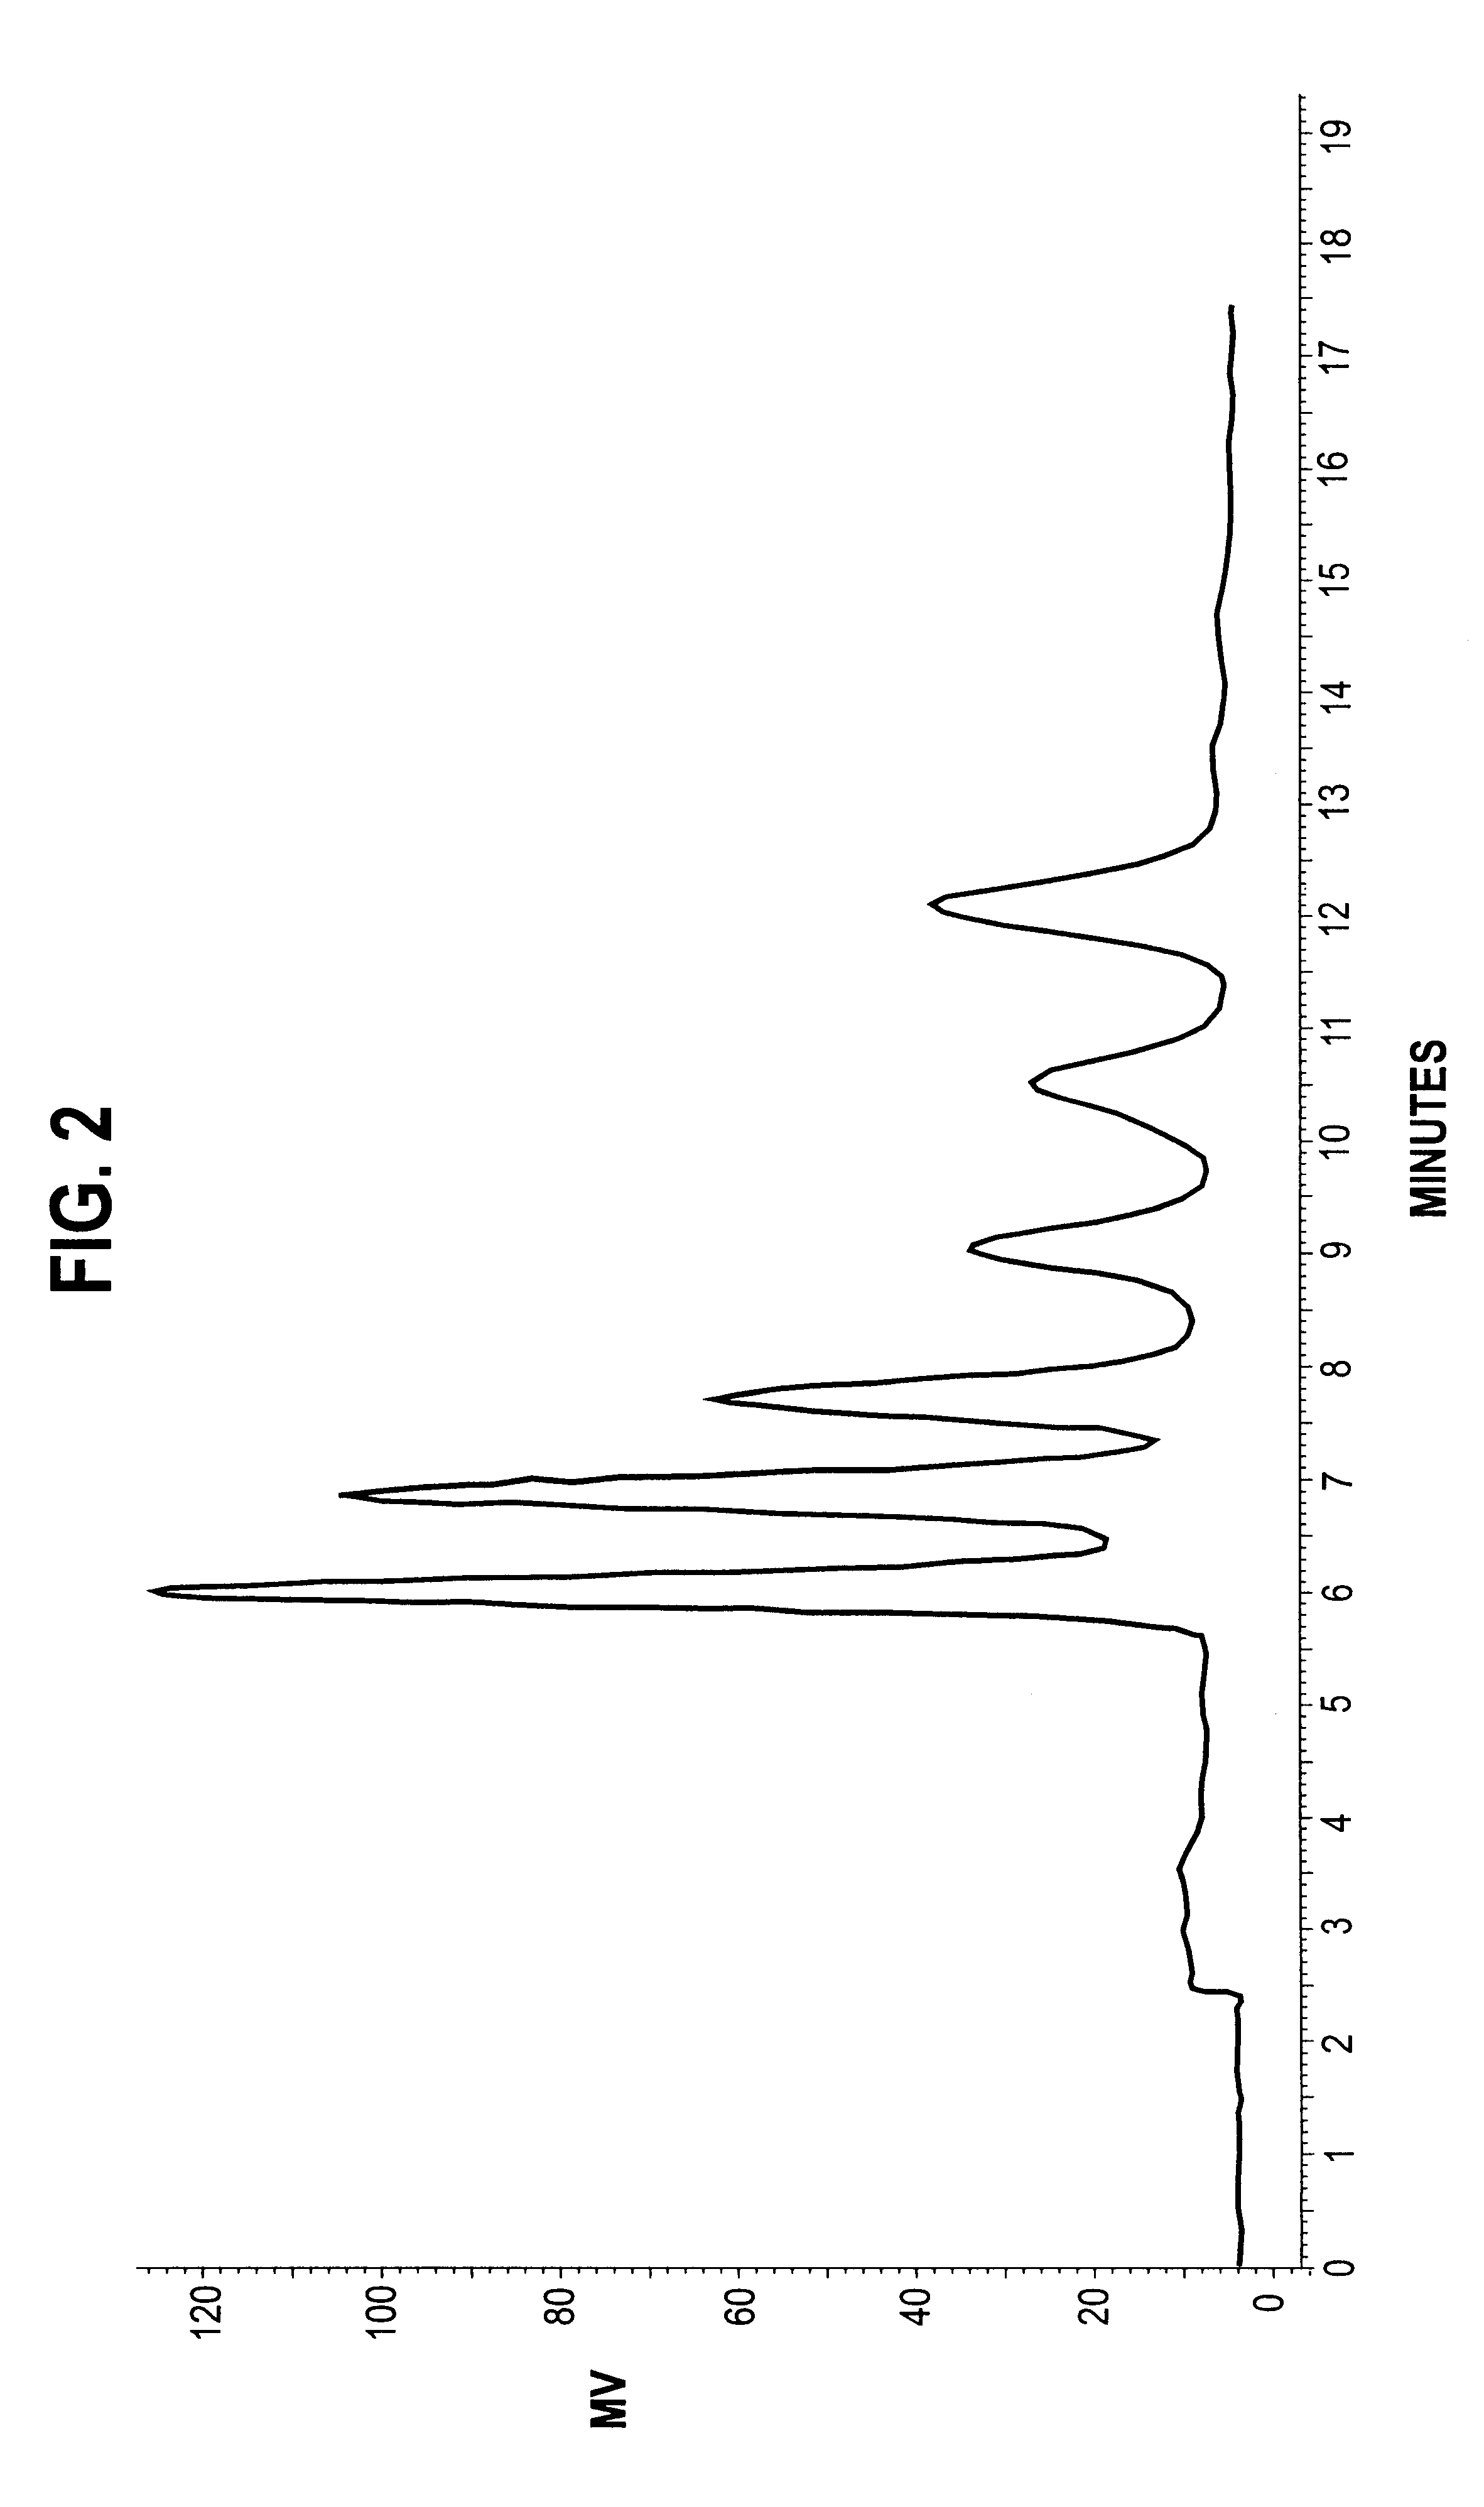 Method for producing purified tocotrienols and tocopherols using liquid chromatography